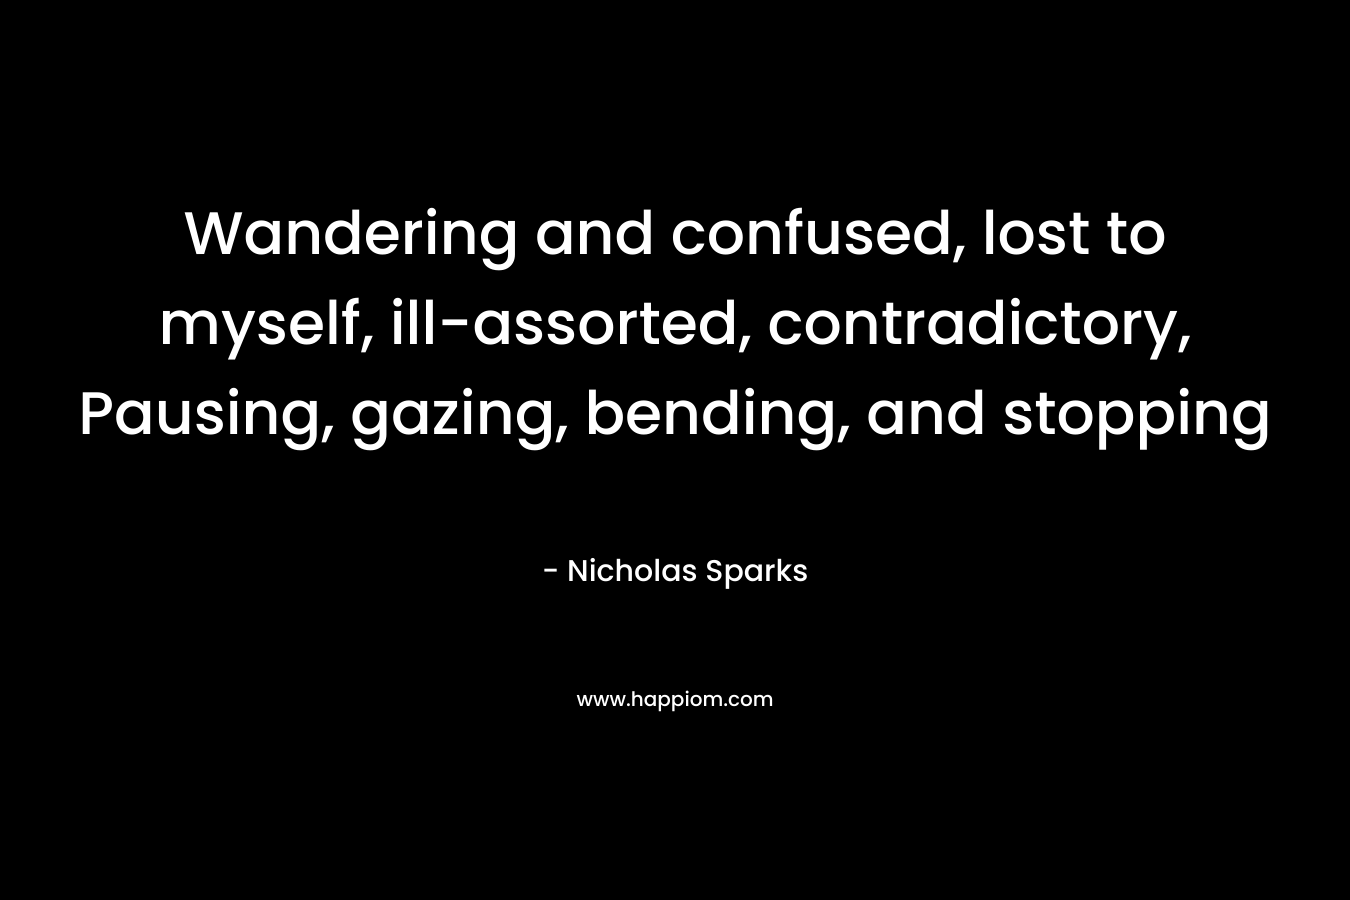 Wandering and confused, lost to myself, ill-assorted, contradictory, Pausing, gazing, bending, and stopping